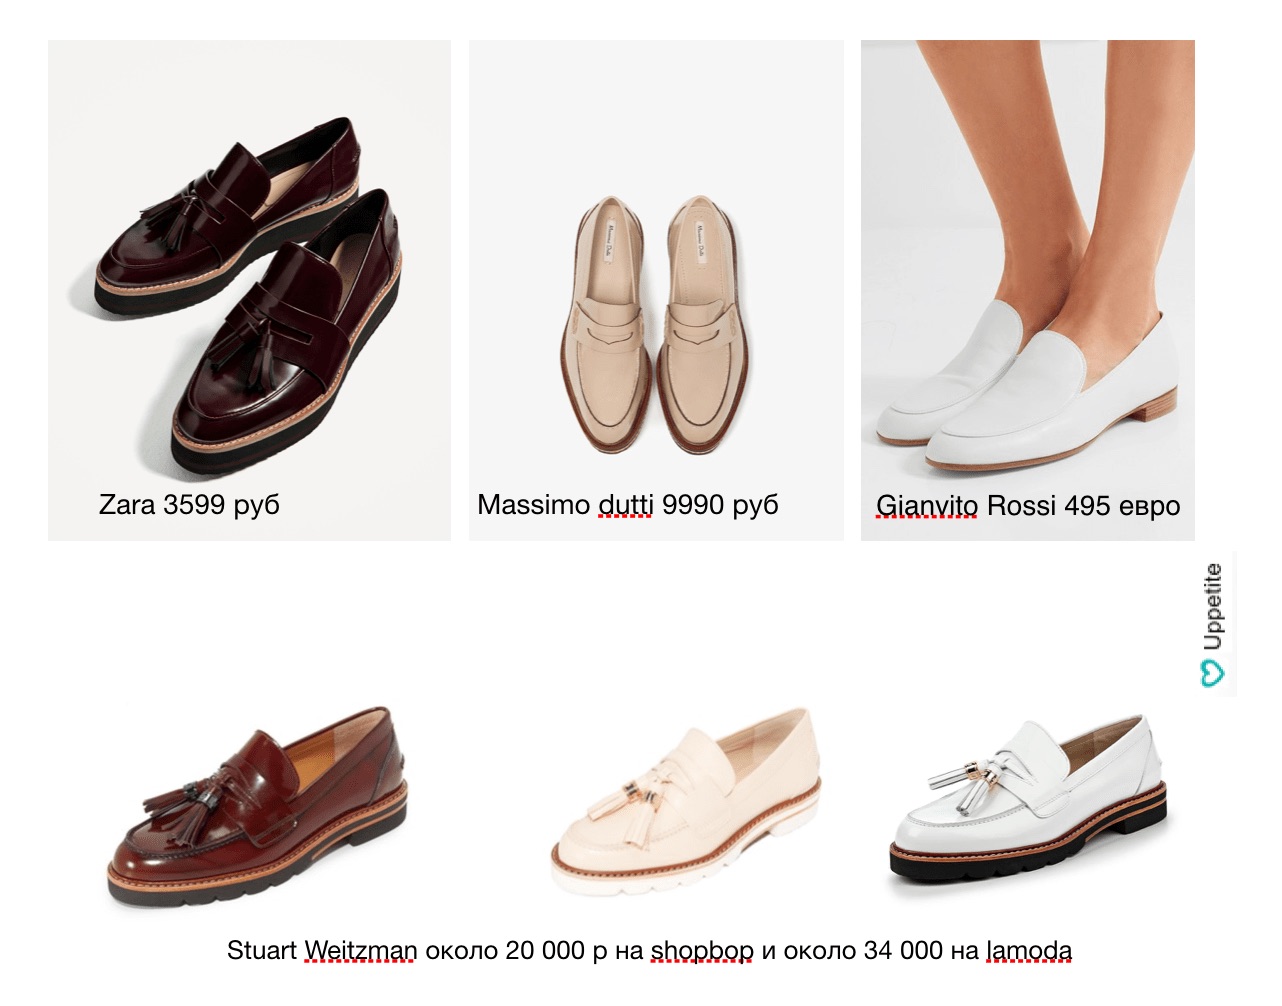 Shoes for small women: what to choose and where to buy depending on the season